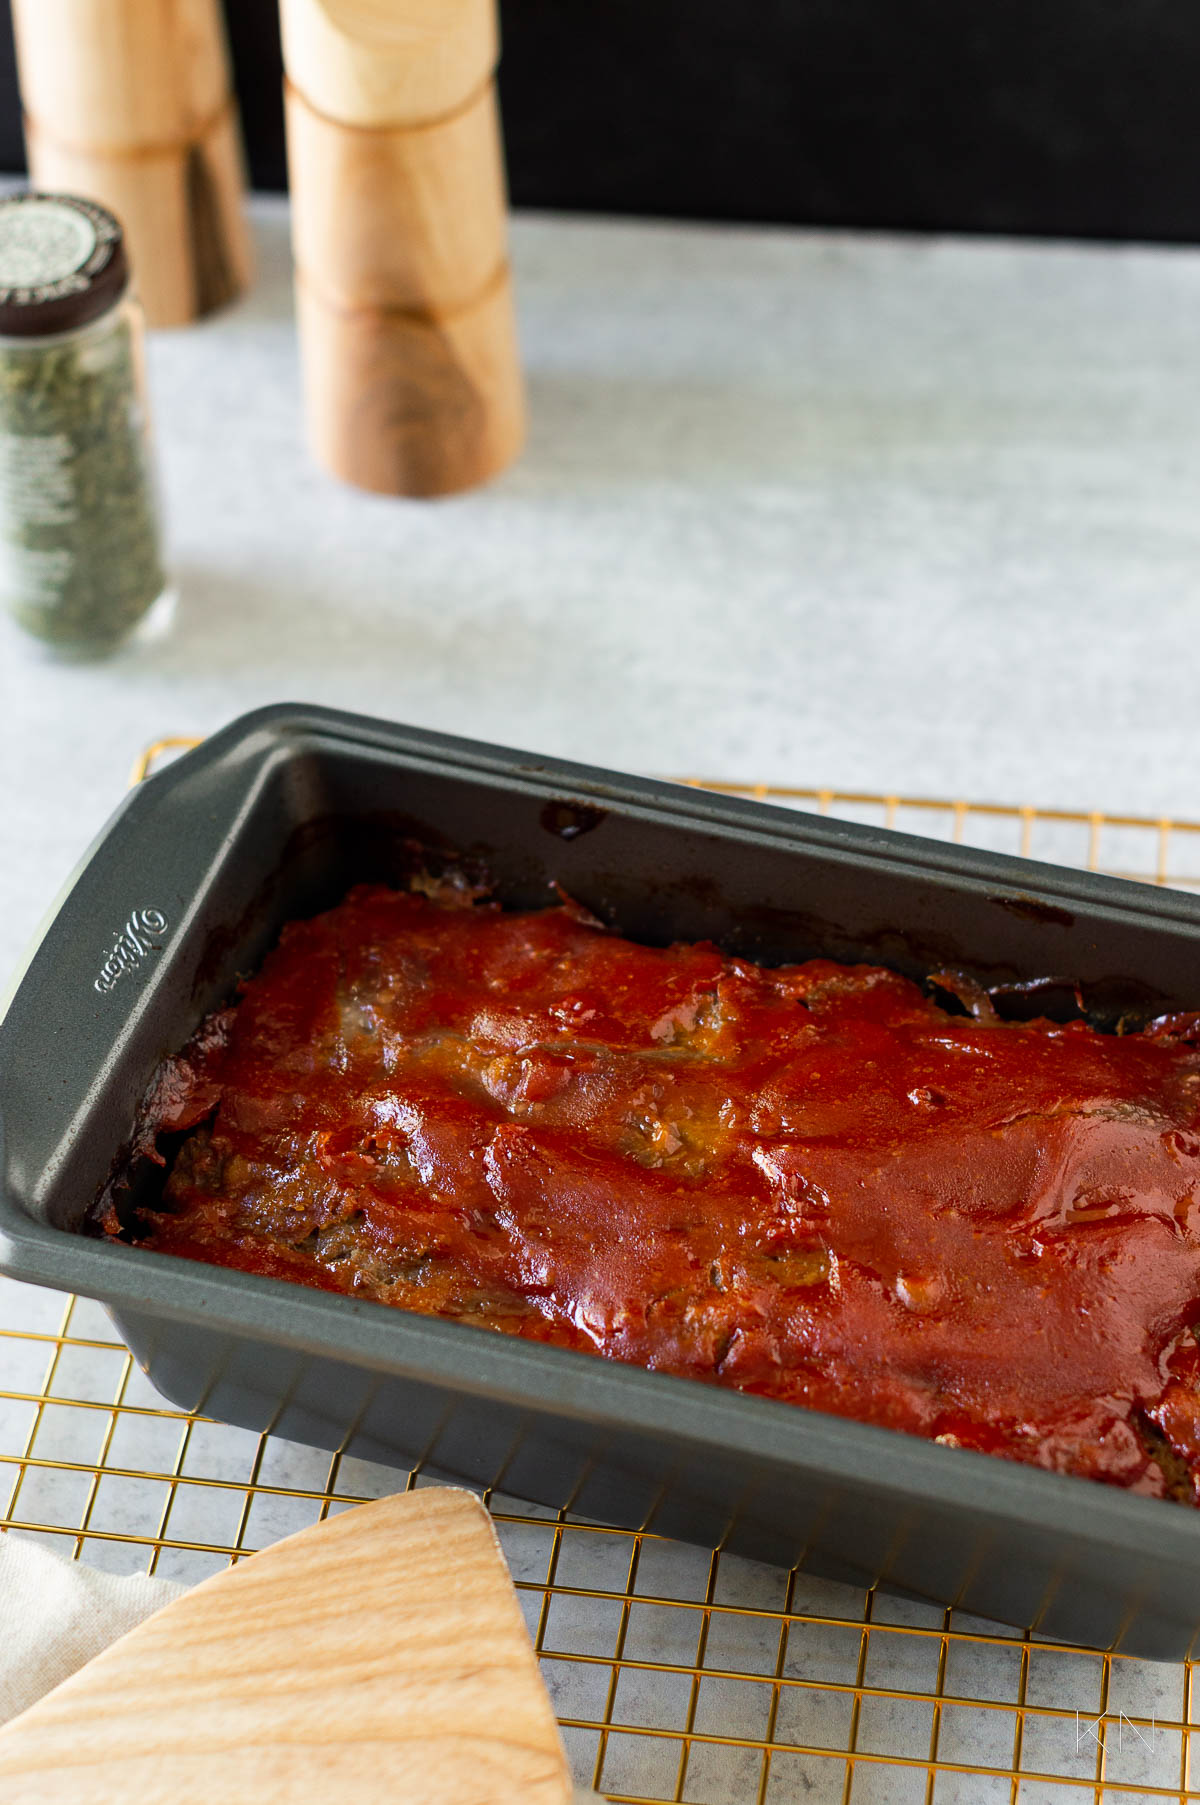 Simple, Delicious Meatloaf with the Best Glaze Topping!